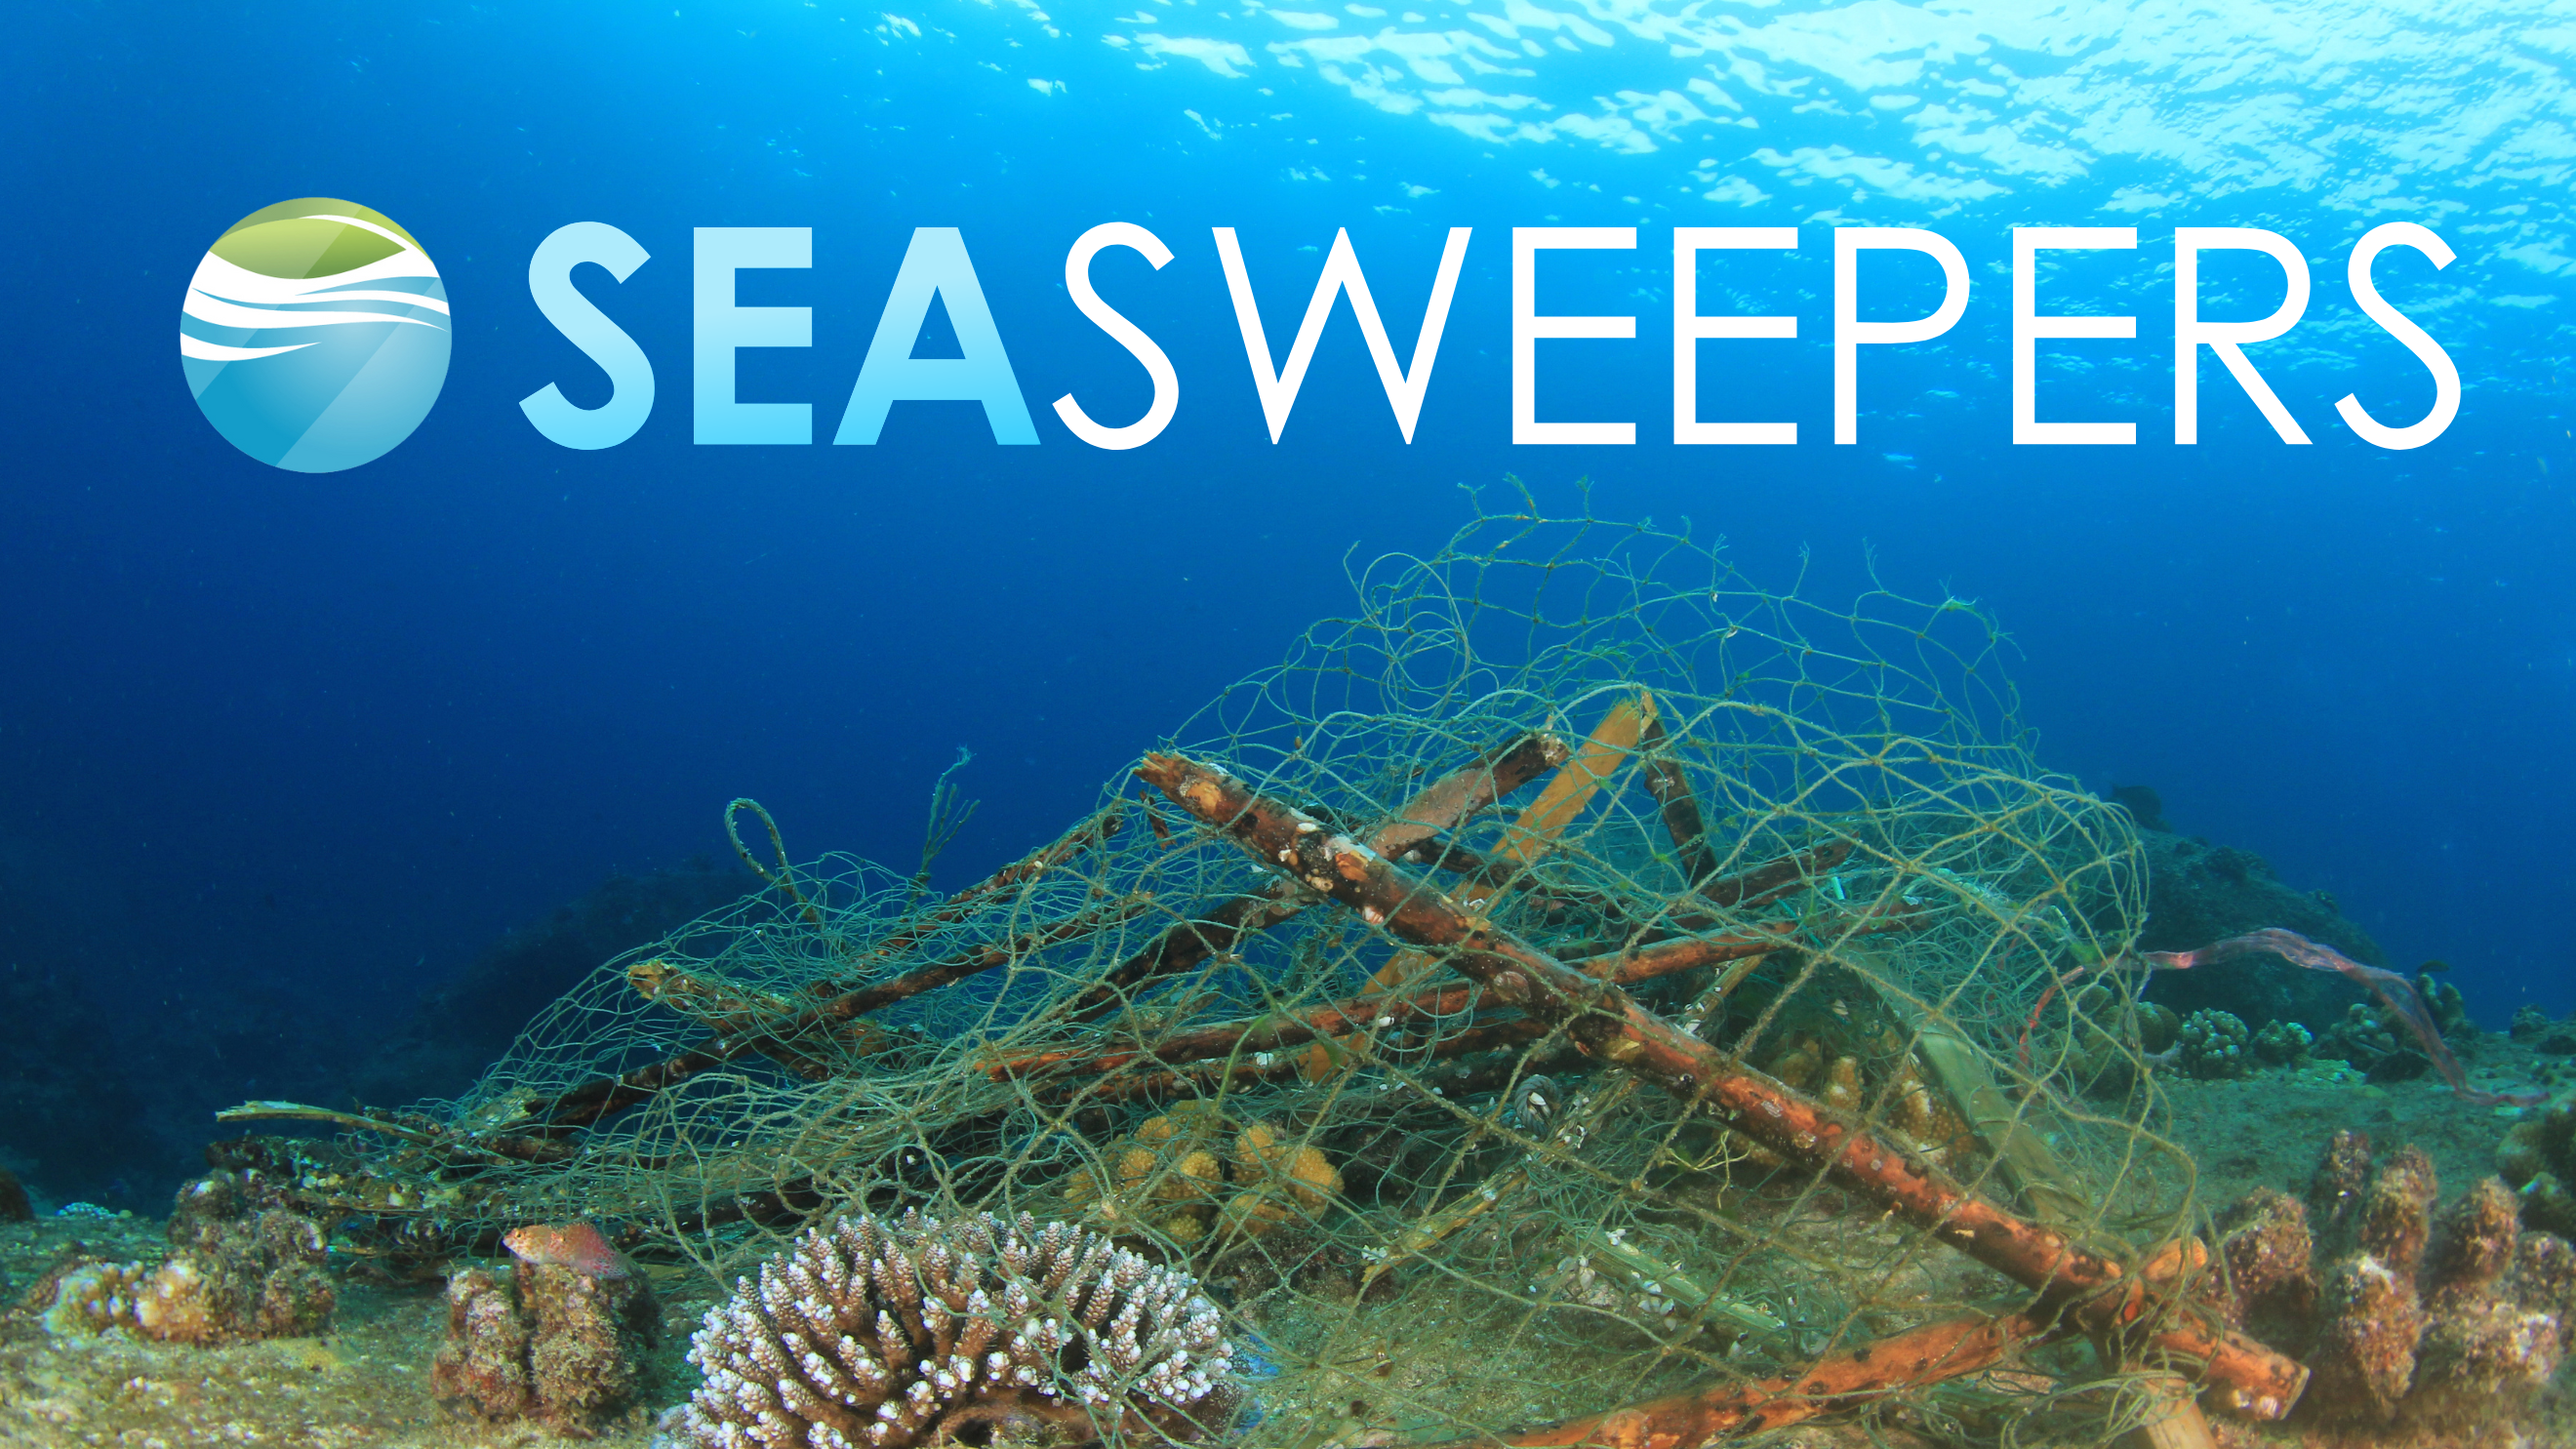 SeaSweepers Logo over image of plastic ghost nets polluting a coral reef.